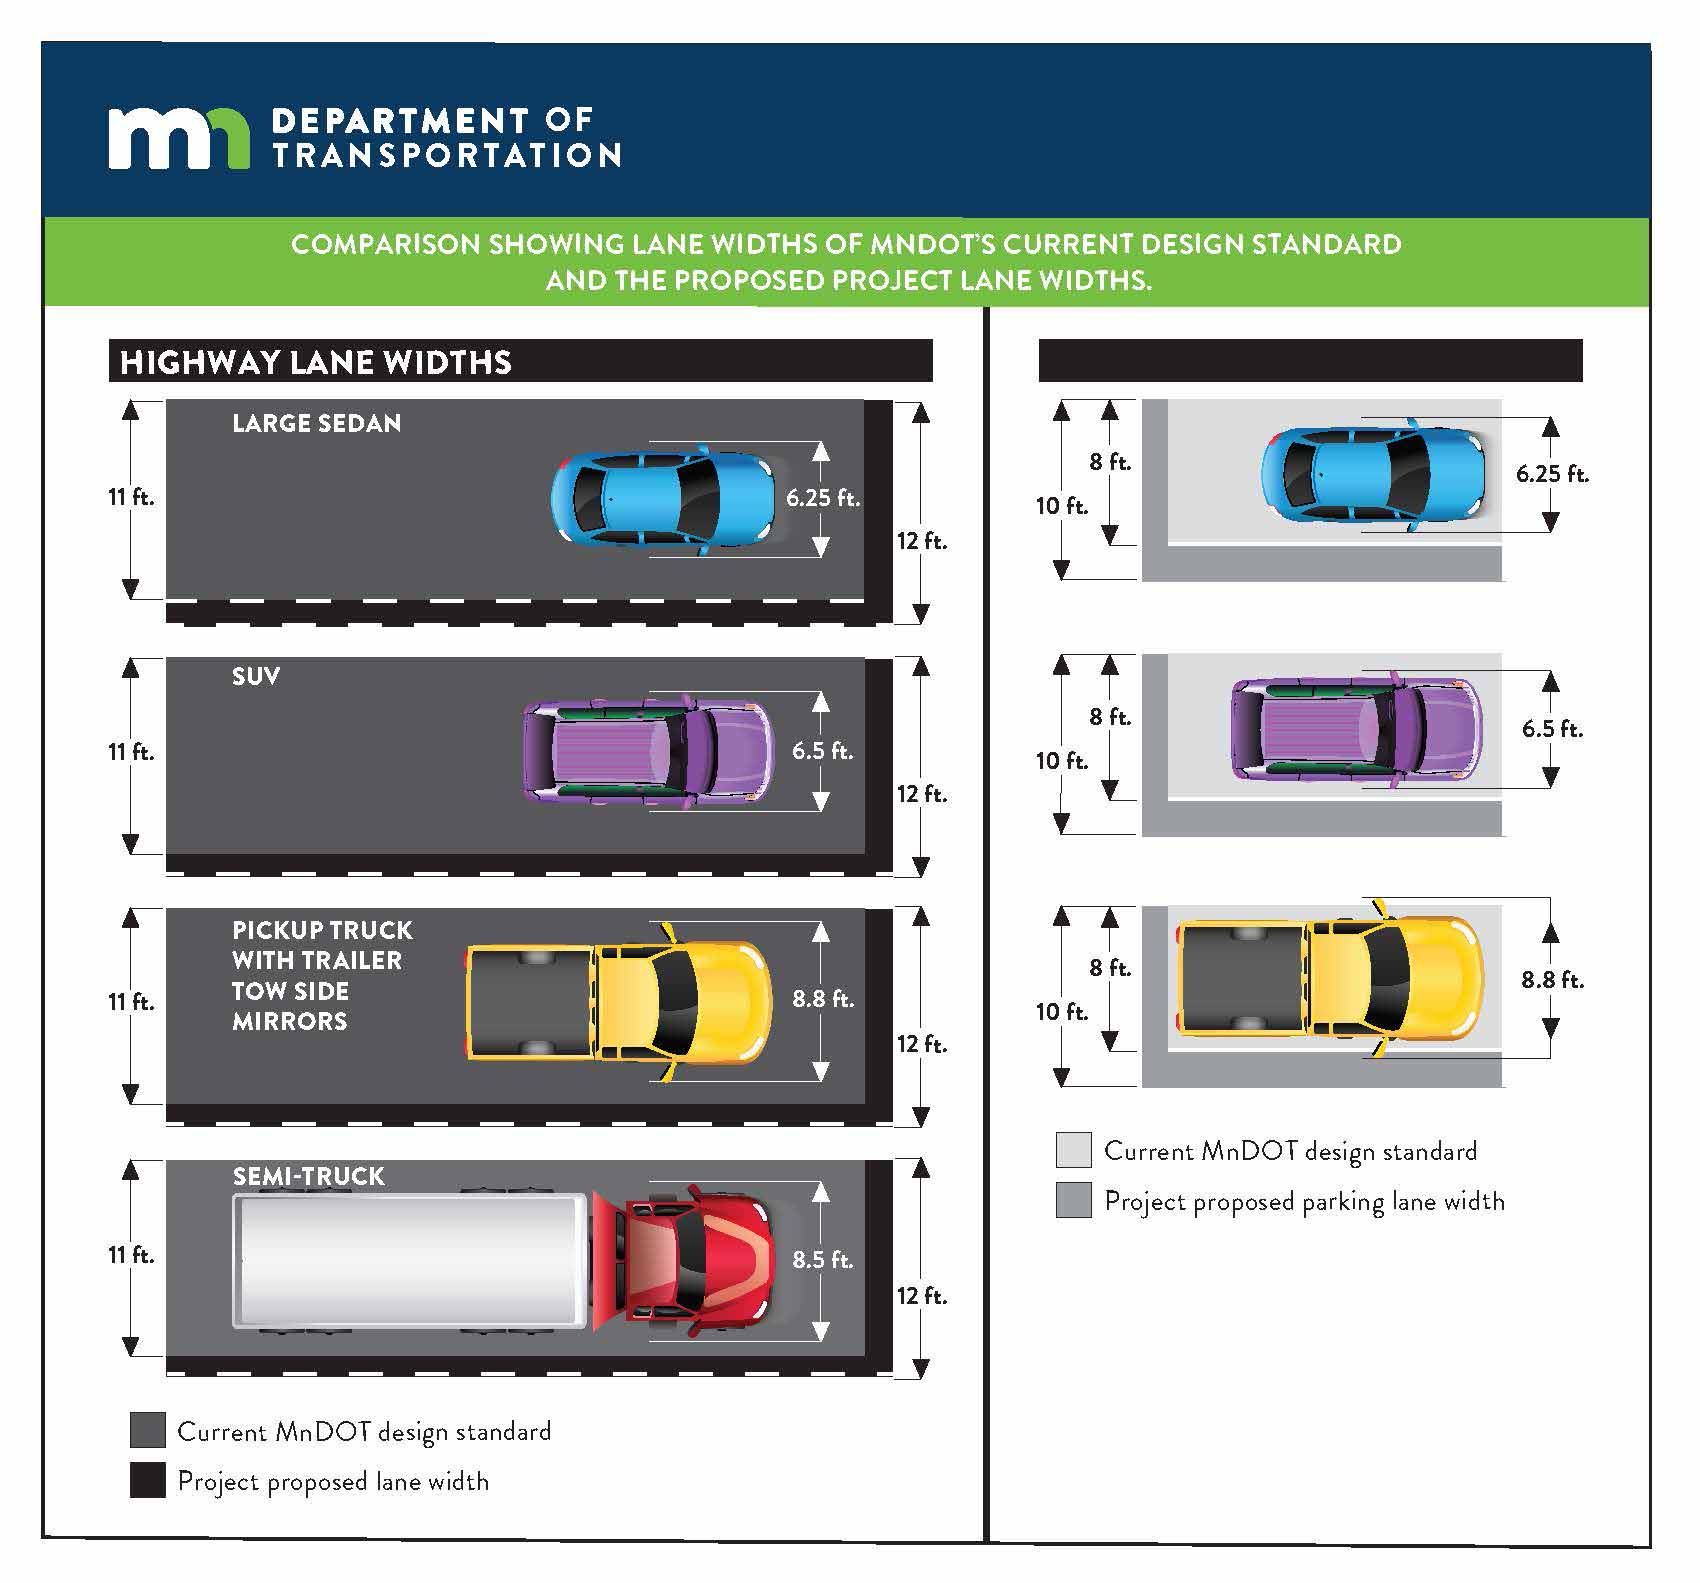 Current Minnesota Department of Transportation design standard of eleven feet vs project proposed width of twelve feet. The second image shows current MnDOT design standard of 8 feet versus proposed ten-foot parking lanes.